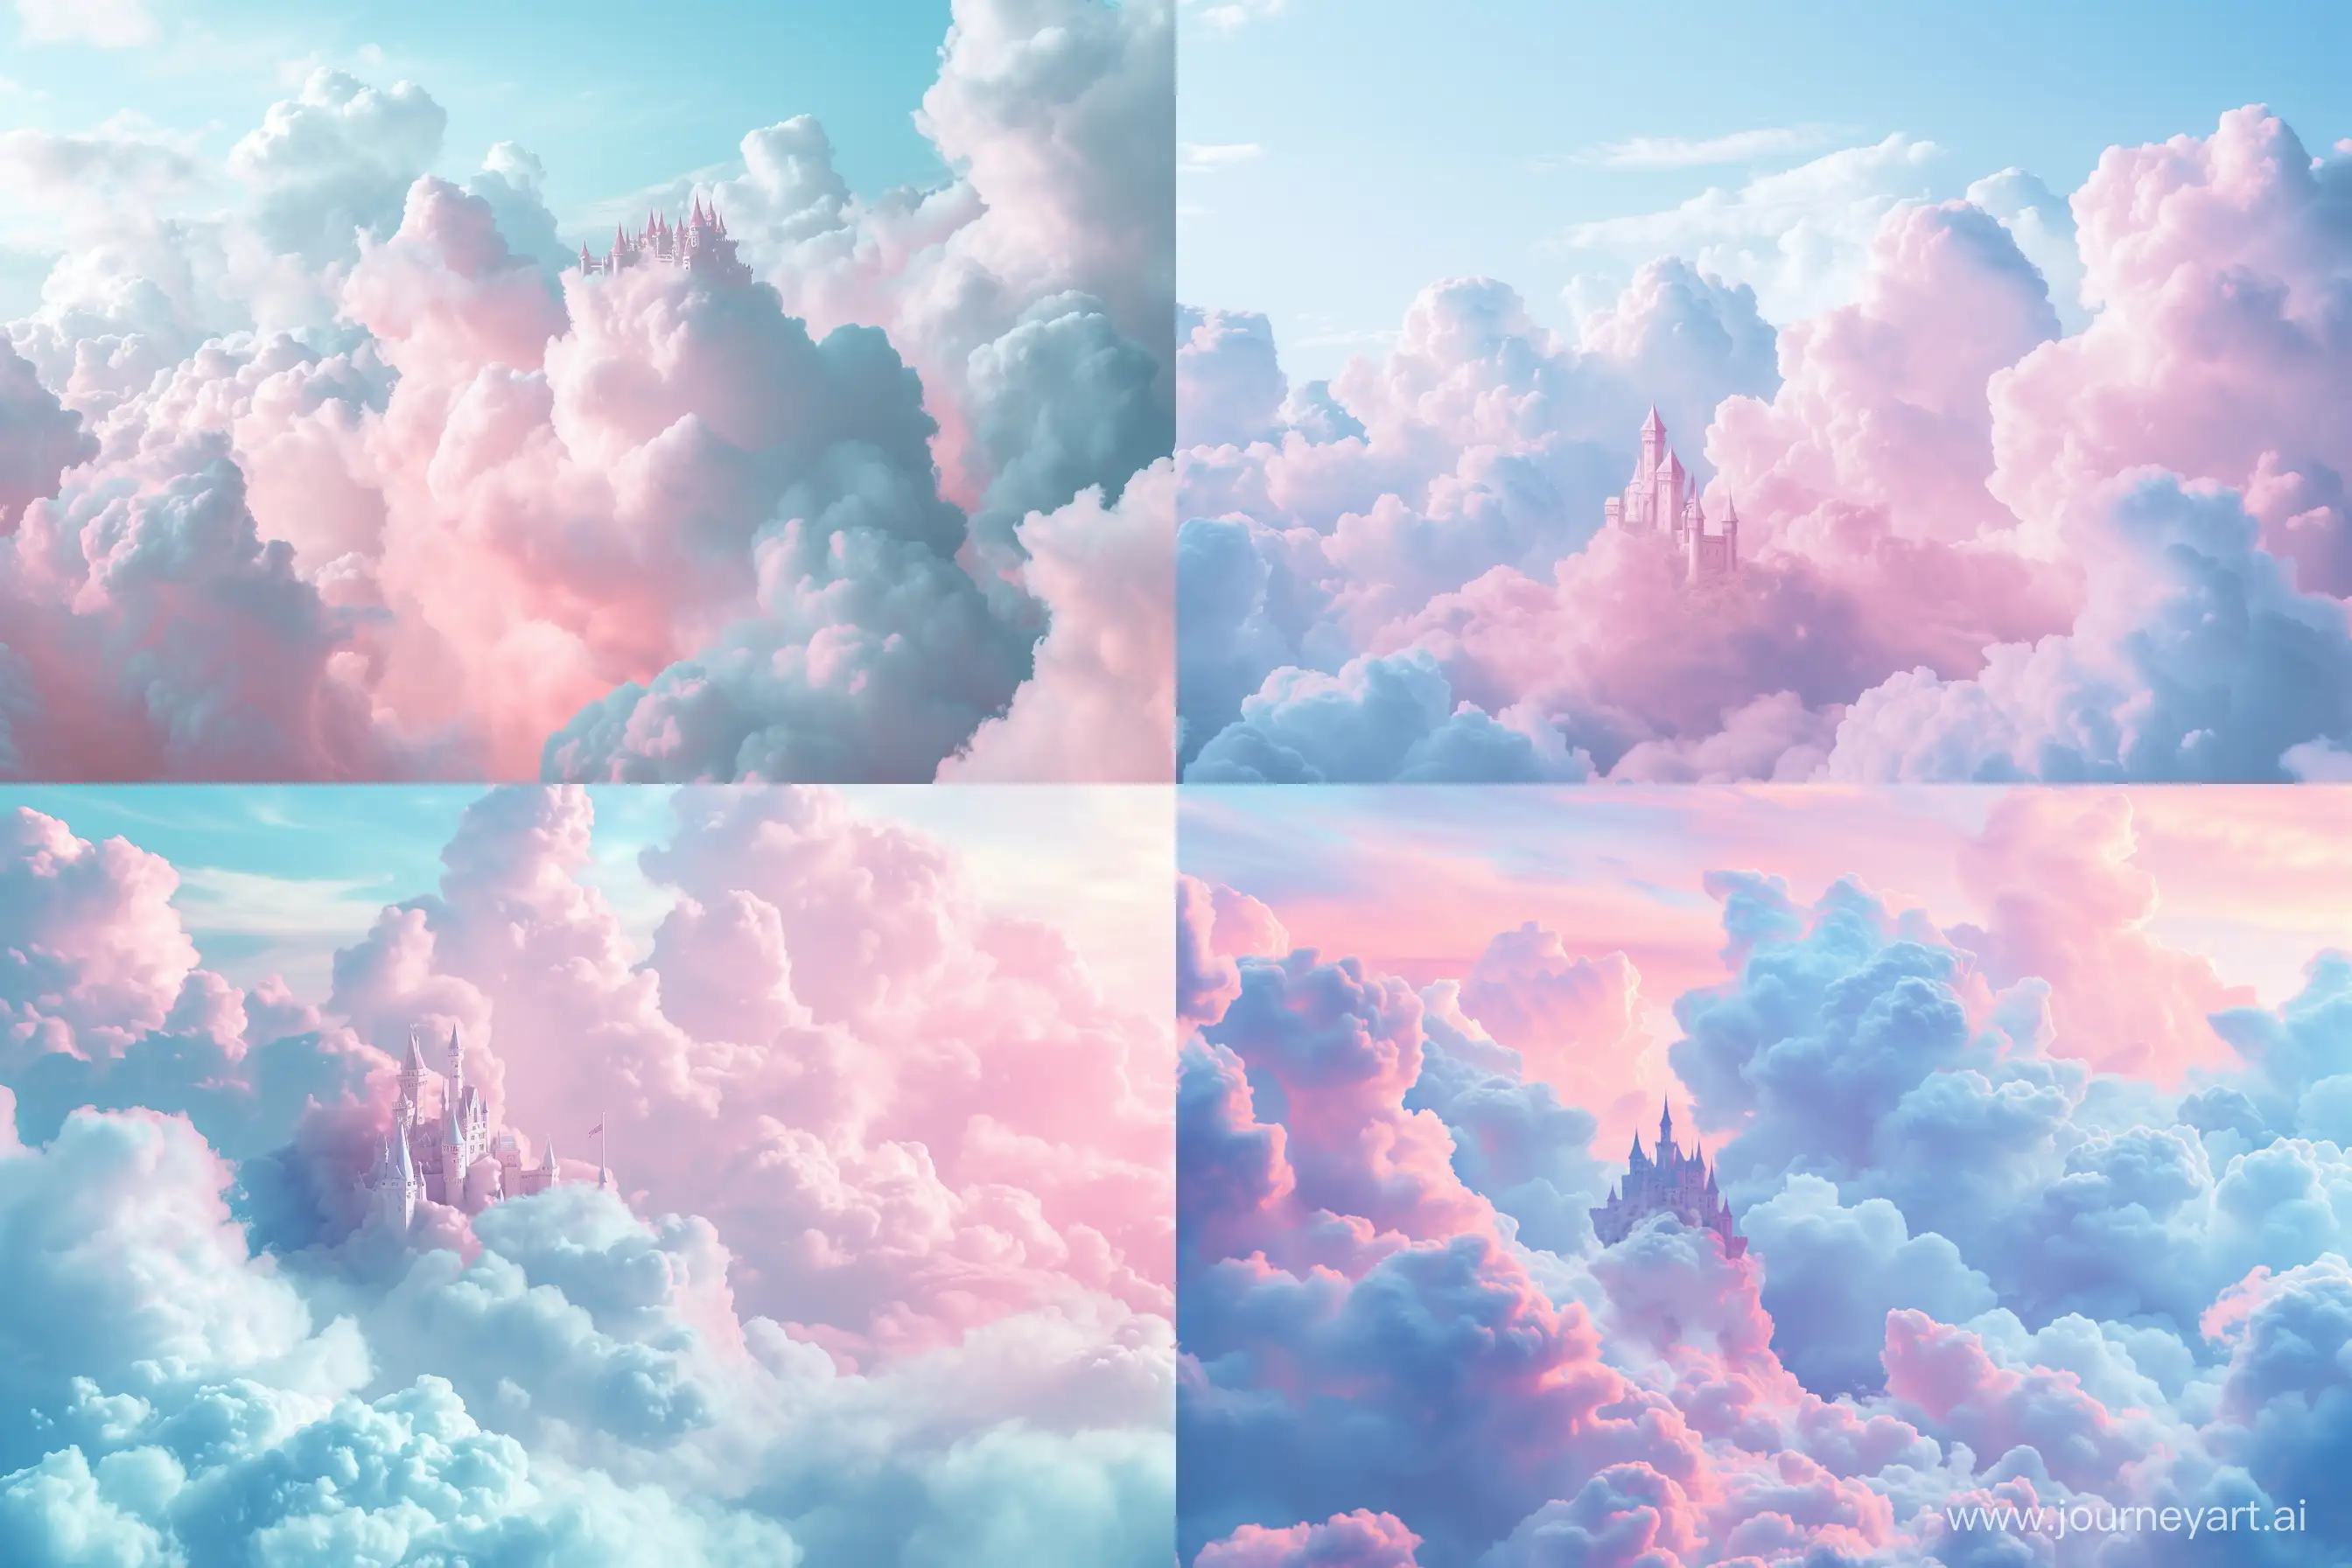 ultra relaistic sky, love castle made of clouds, dreamy clouds pink and baby blue all around --ar 3:2